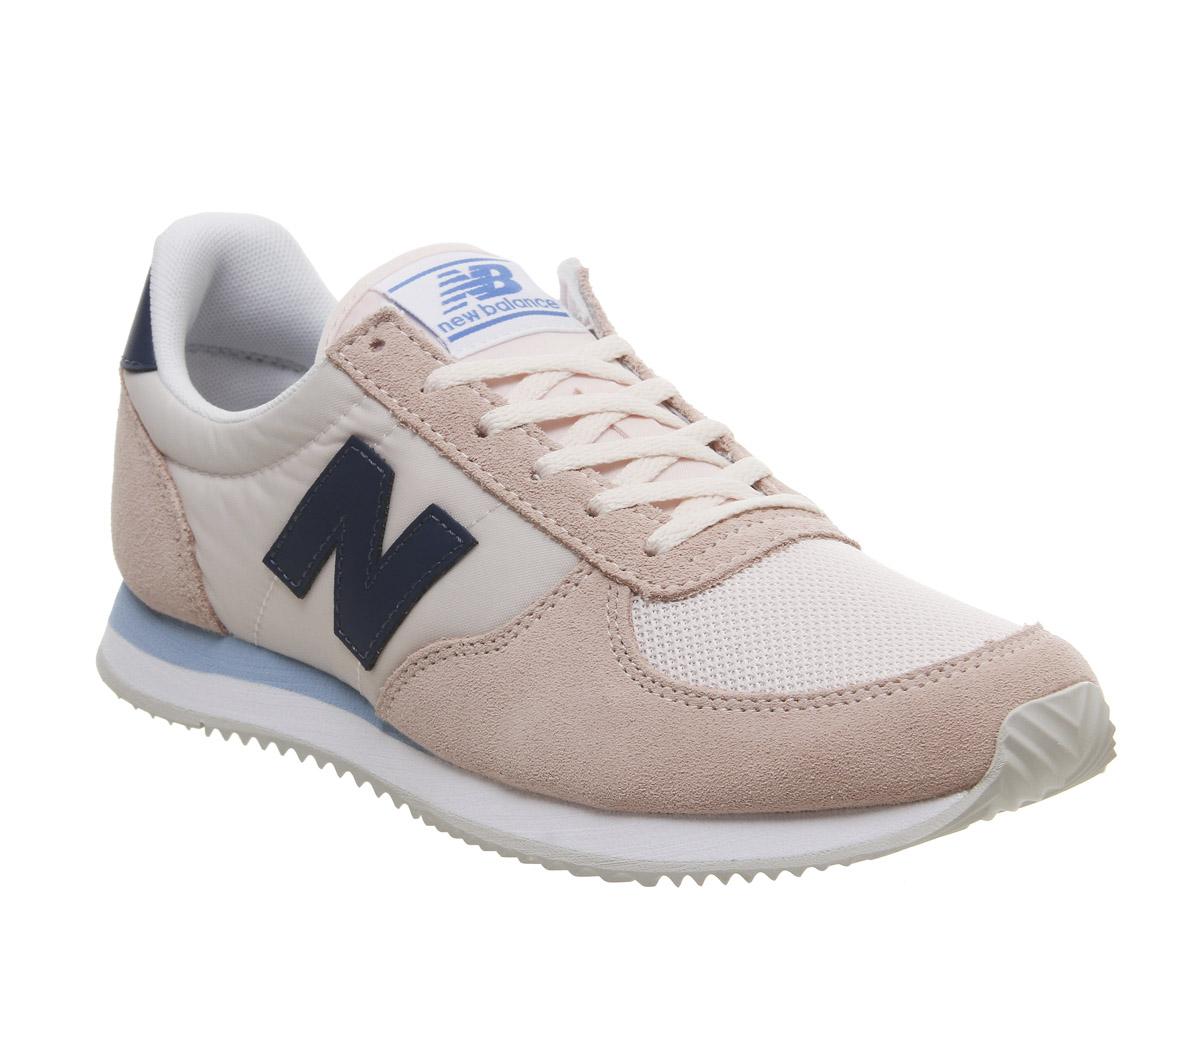 New Balance Wl220 Trainers Oyster Pink 